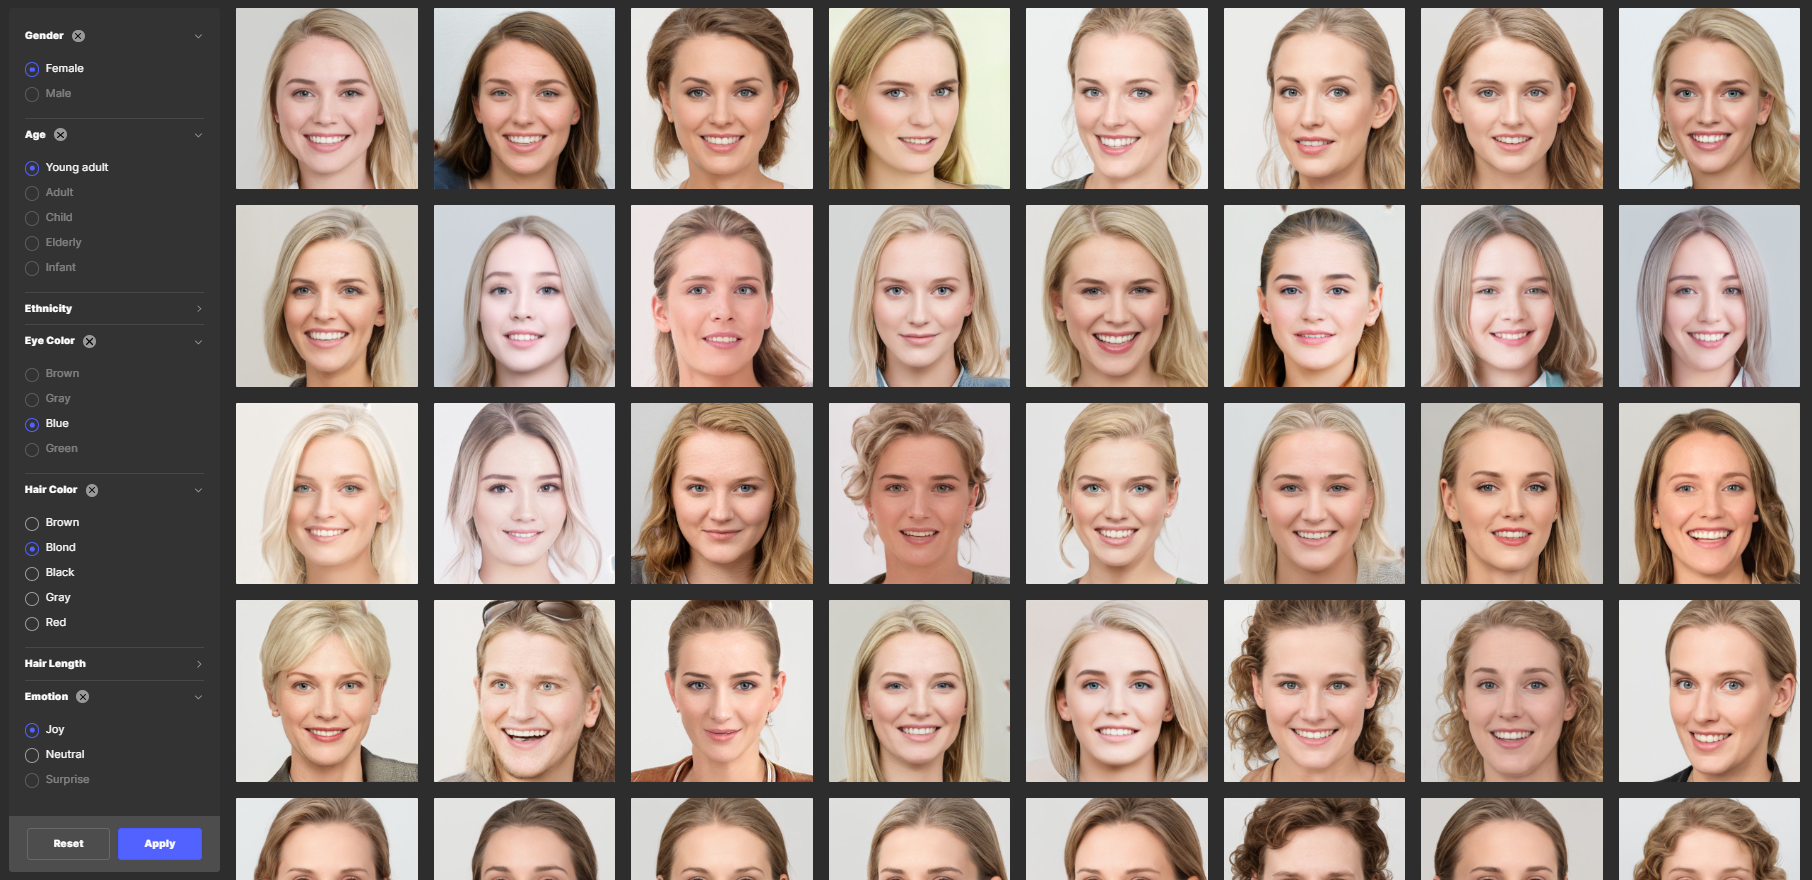 Can “fake faces” Lead to the Illusion of Diversity?